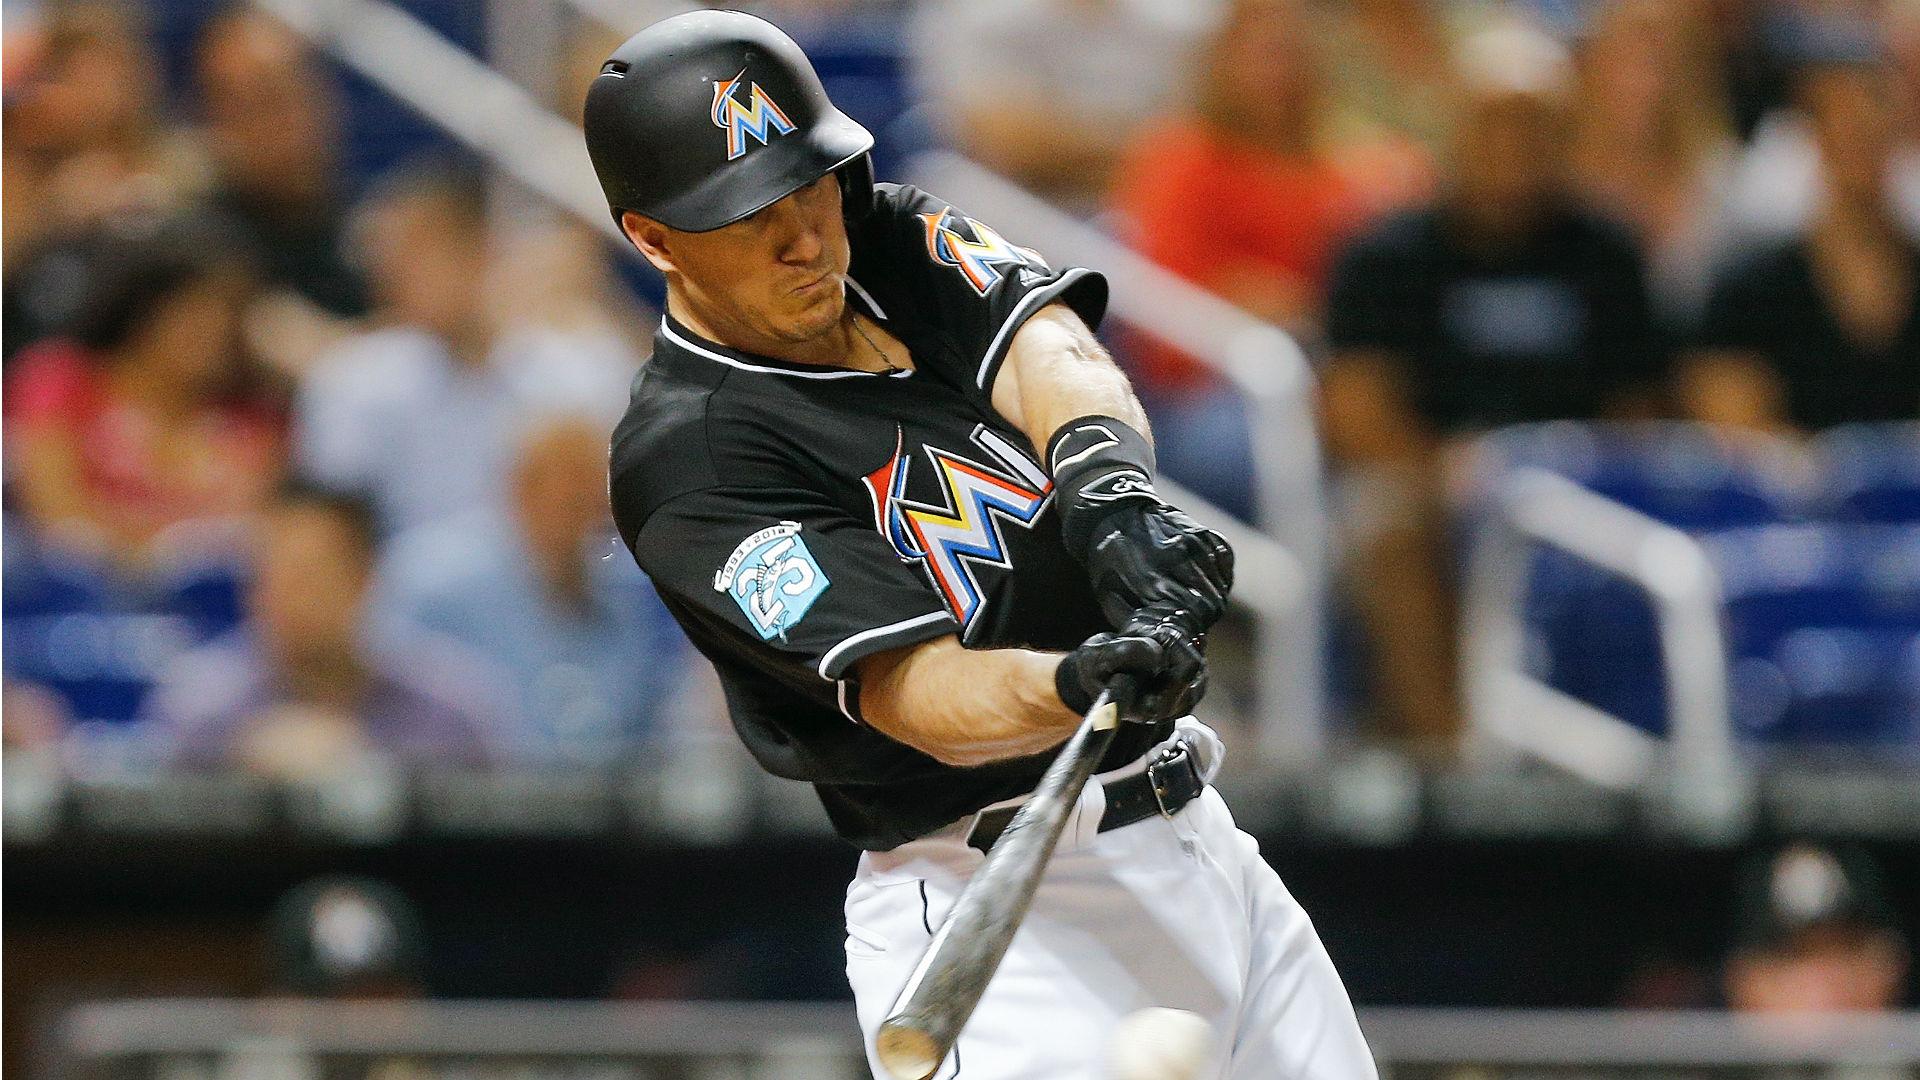 MLB Trade Rumors: Mets Discussing Acquiring J.T. Realmuto In 3 Team